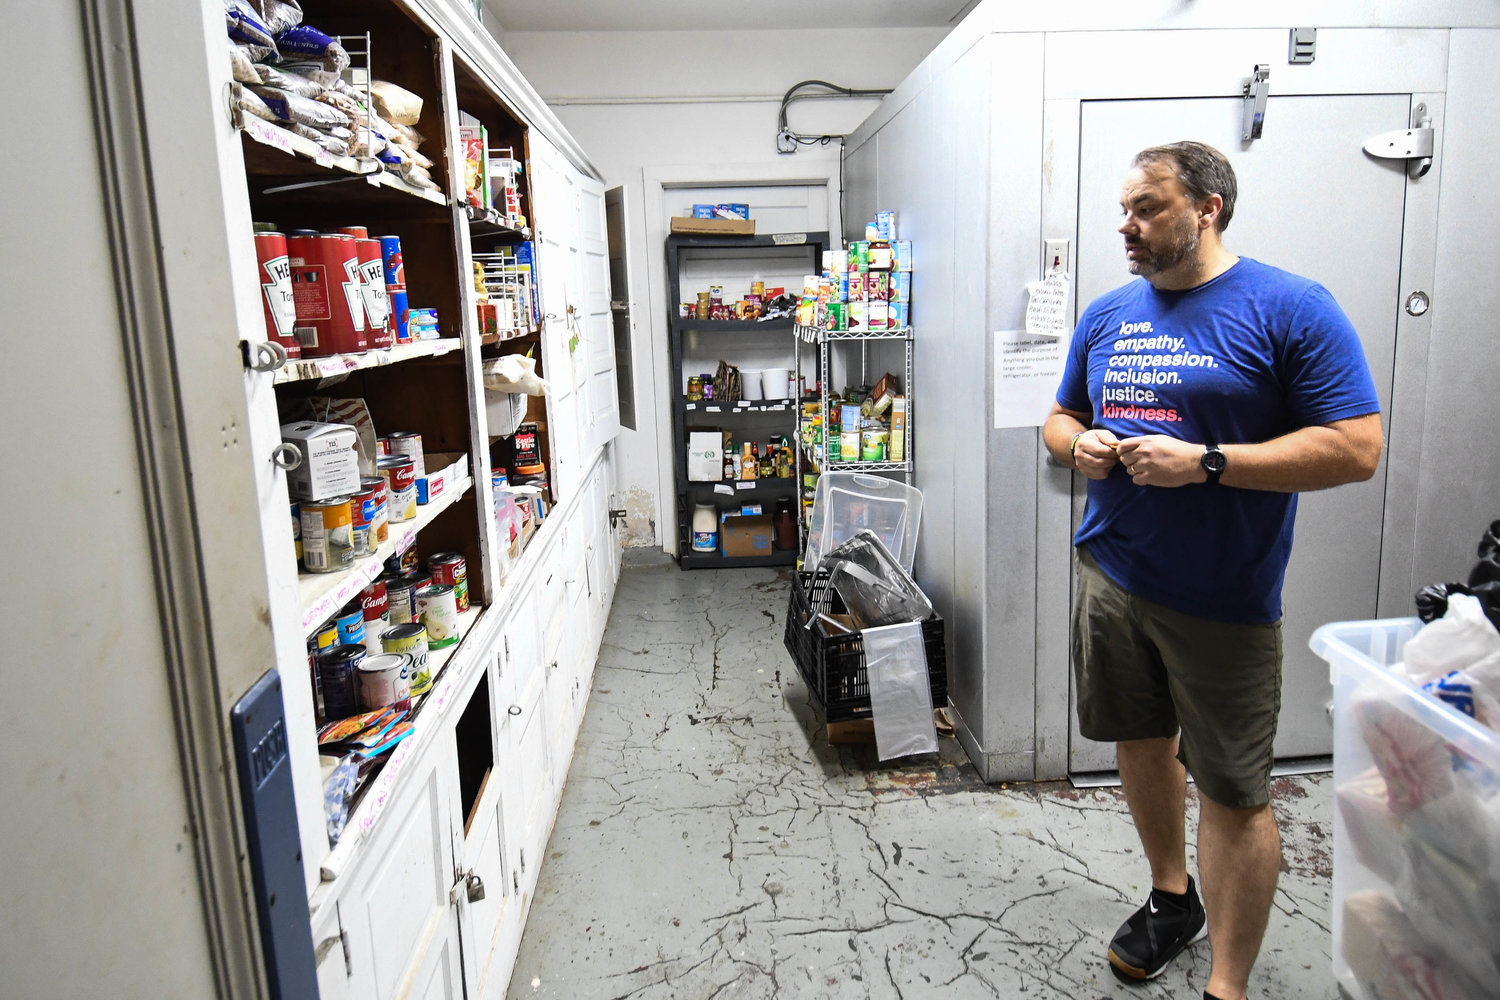 Pastor Mike Ballman talks about the food pantry at Cornerstone Plymouth Bethesda Church in Utica. Donations of food, clothing and any other living essentials are always needed to help aid the homeless community and those in need.